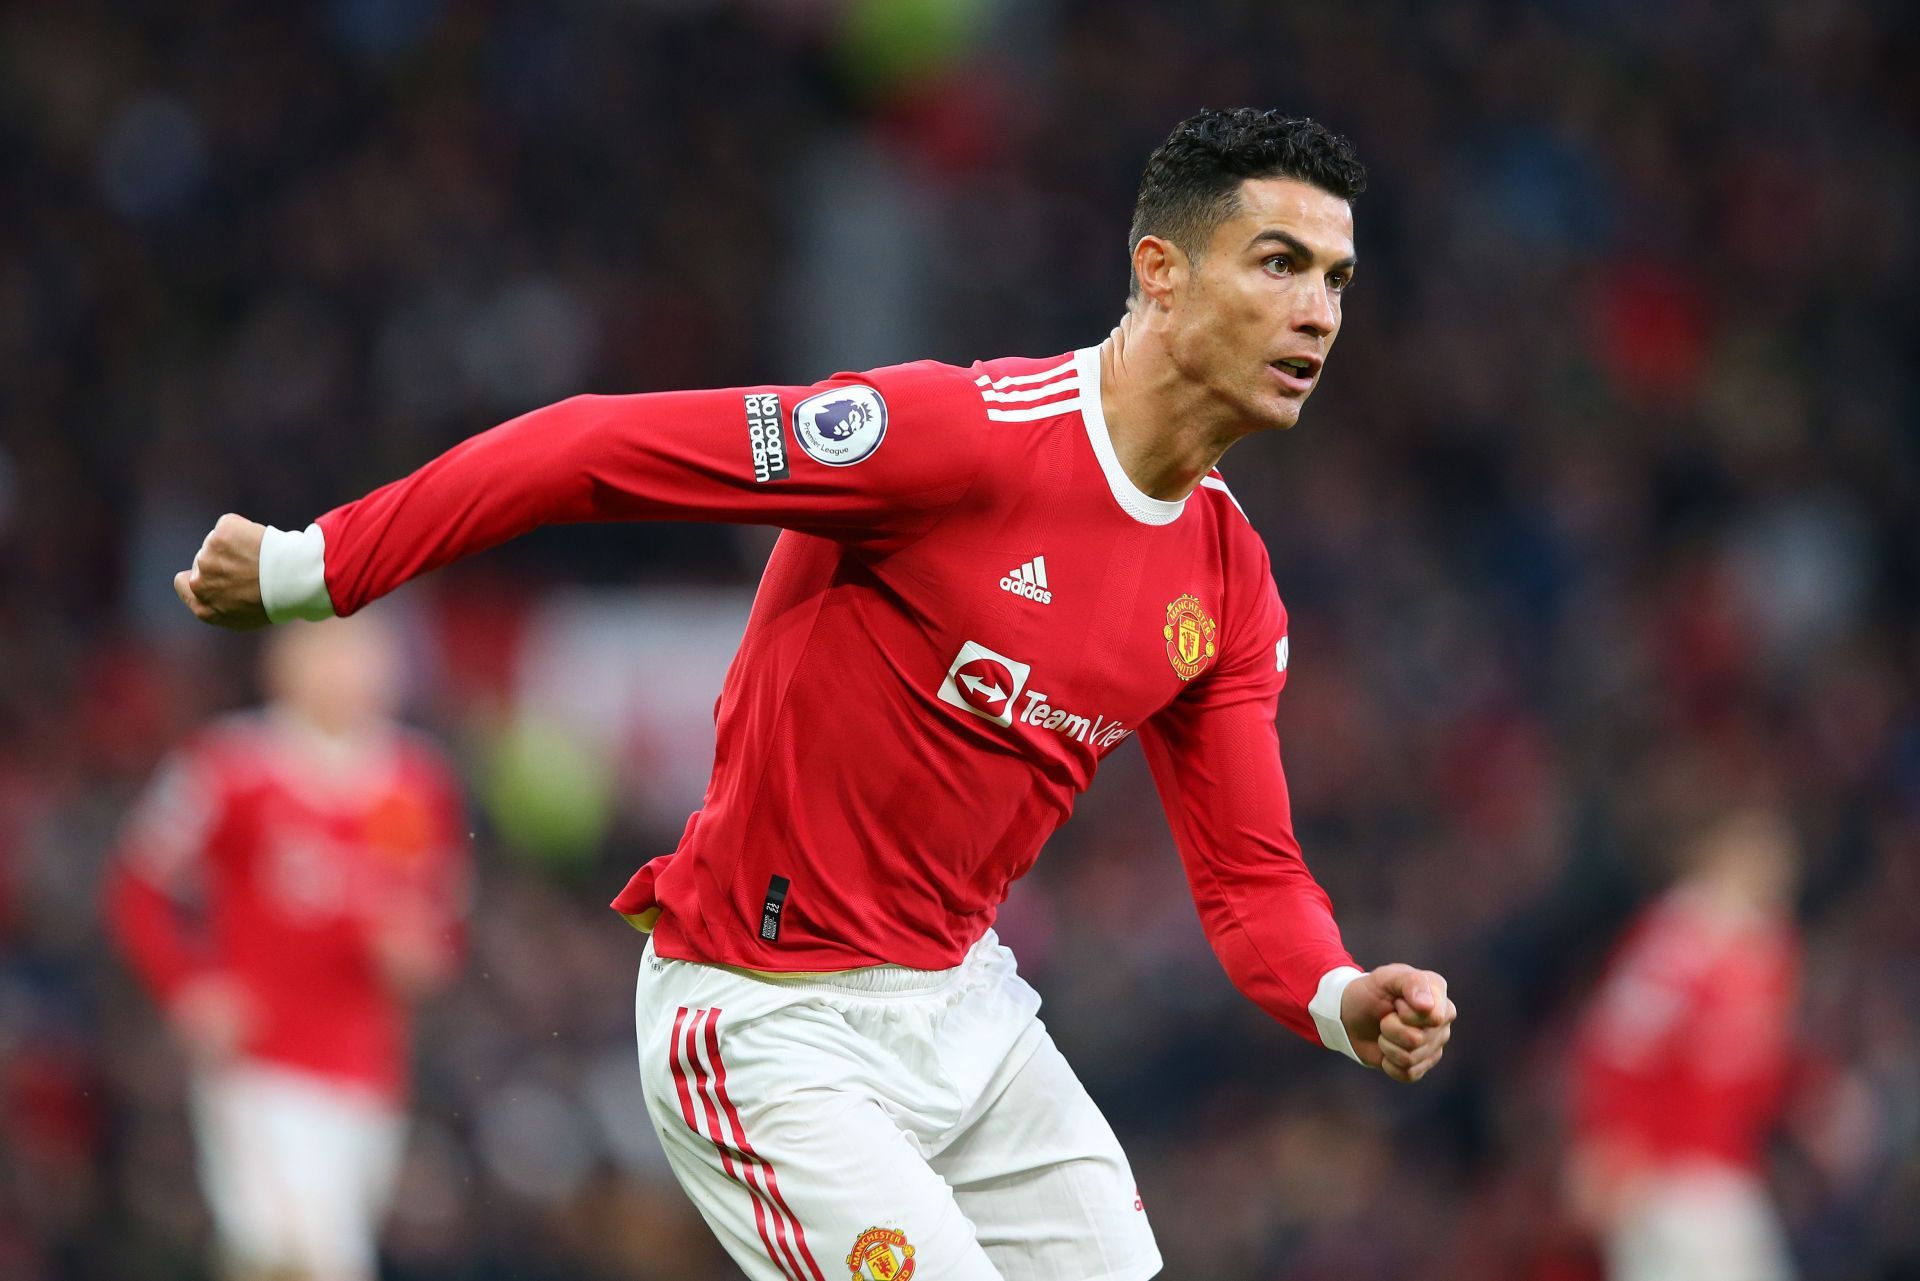 Manchester United superstar Cristiano Ronaldo will be a massive threat to Norwich City players